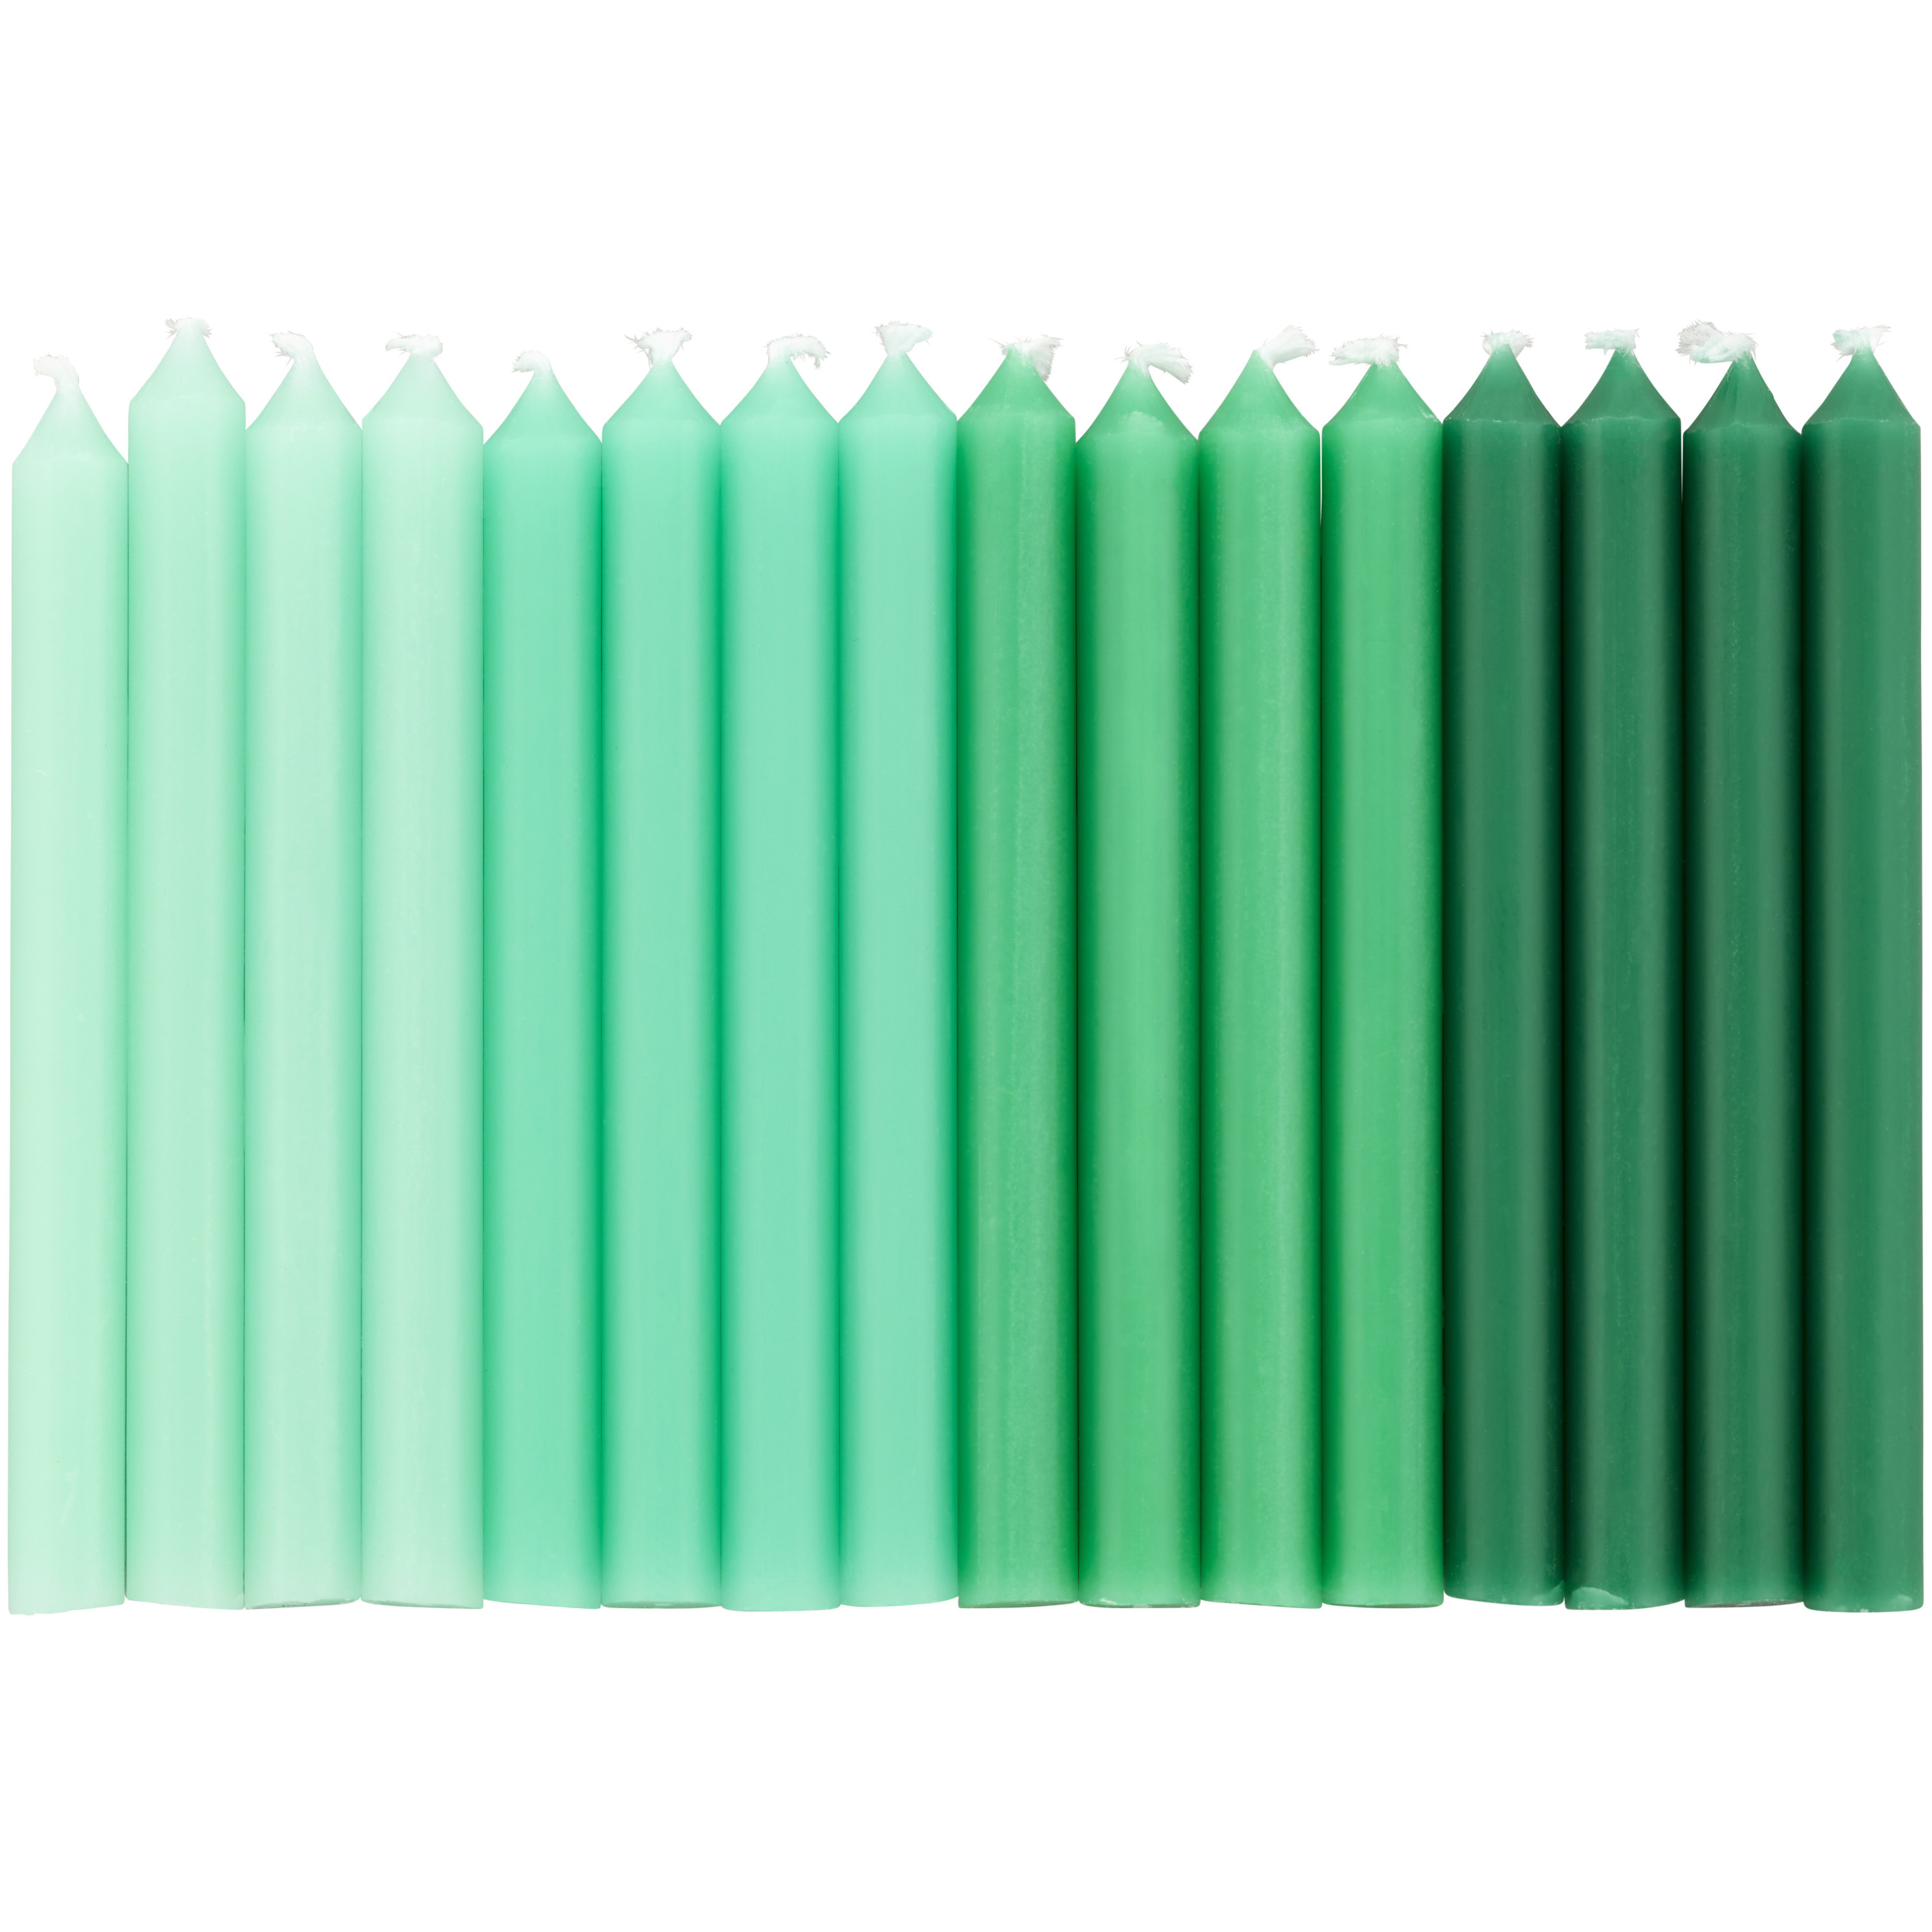 Wilton Light Green, Green and Dark Green Ombre Birthday Candles, 16-Count - image 1 of 4